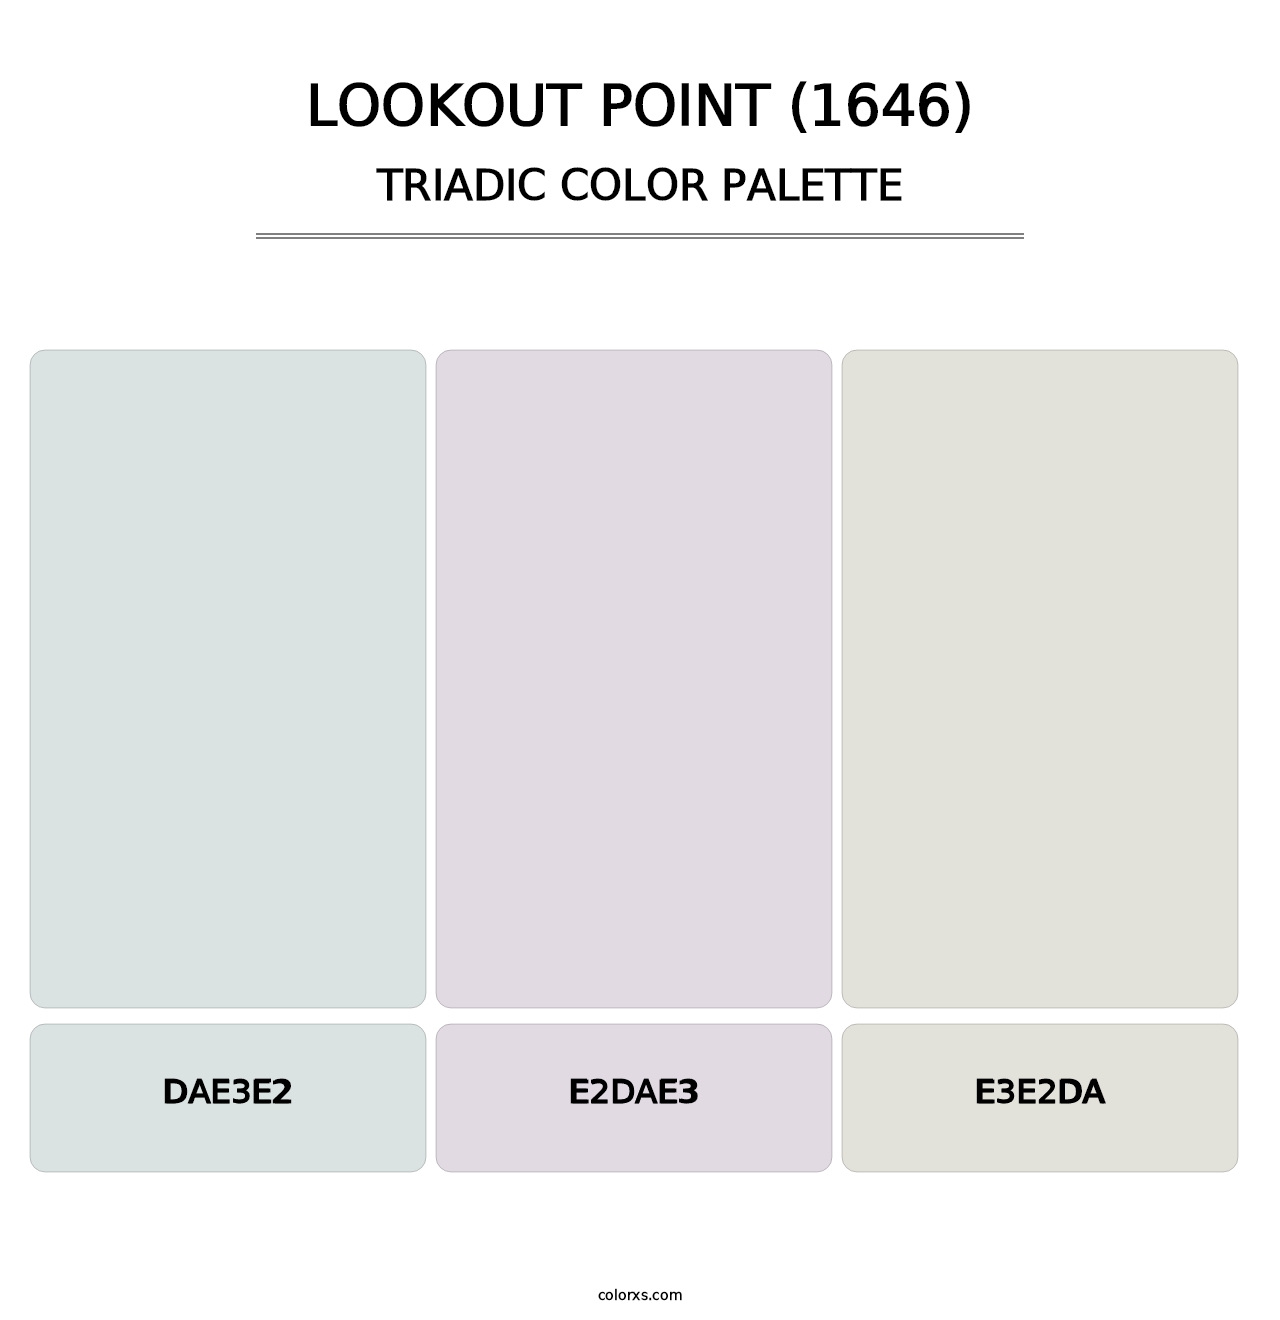 Lookout Point (1646) - Triadic Color Palette